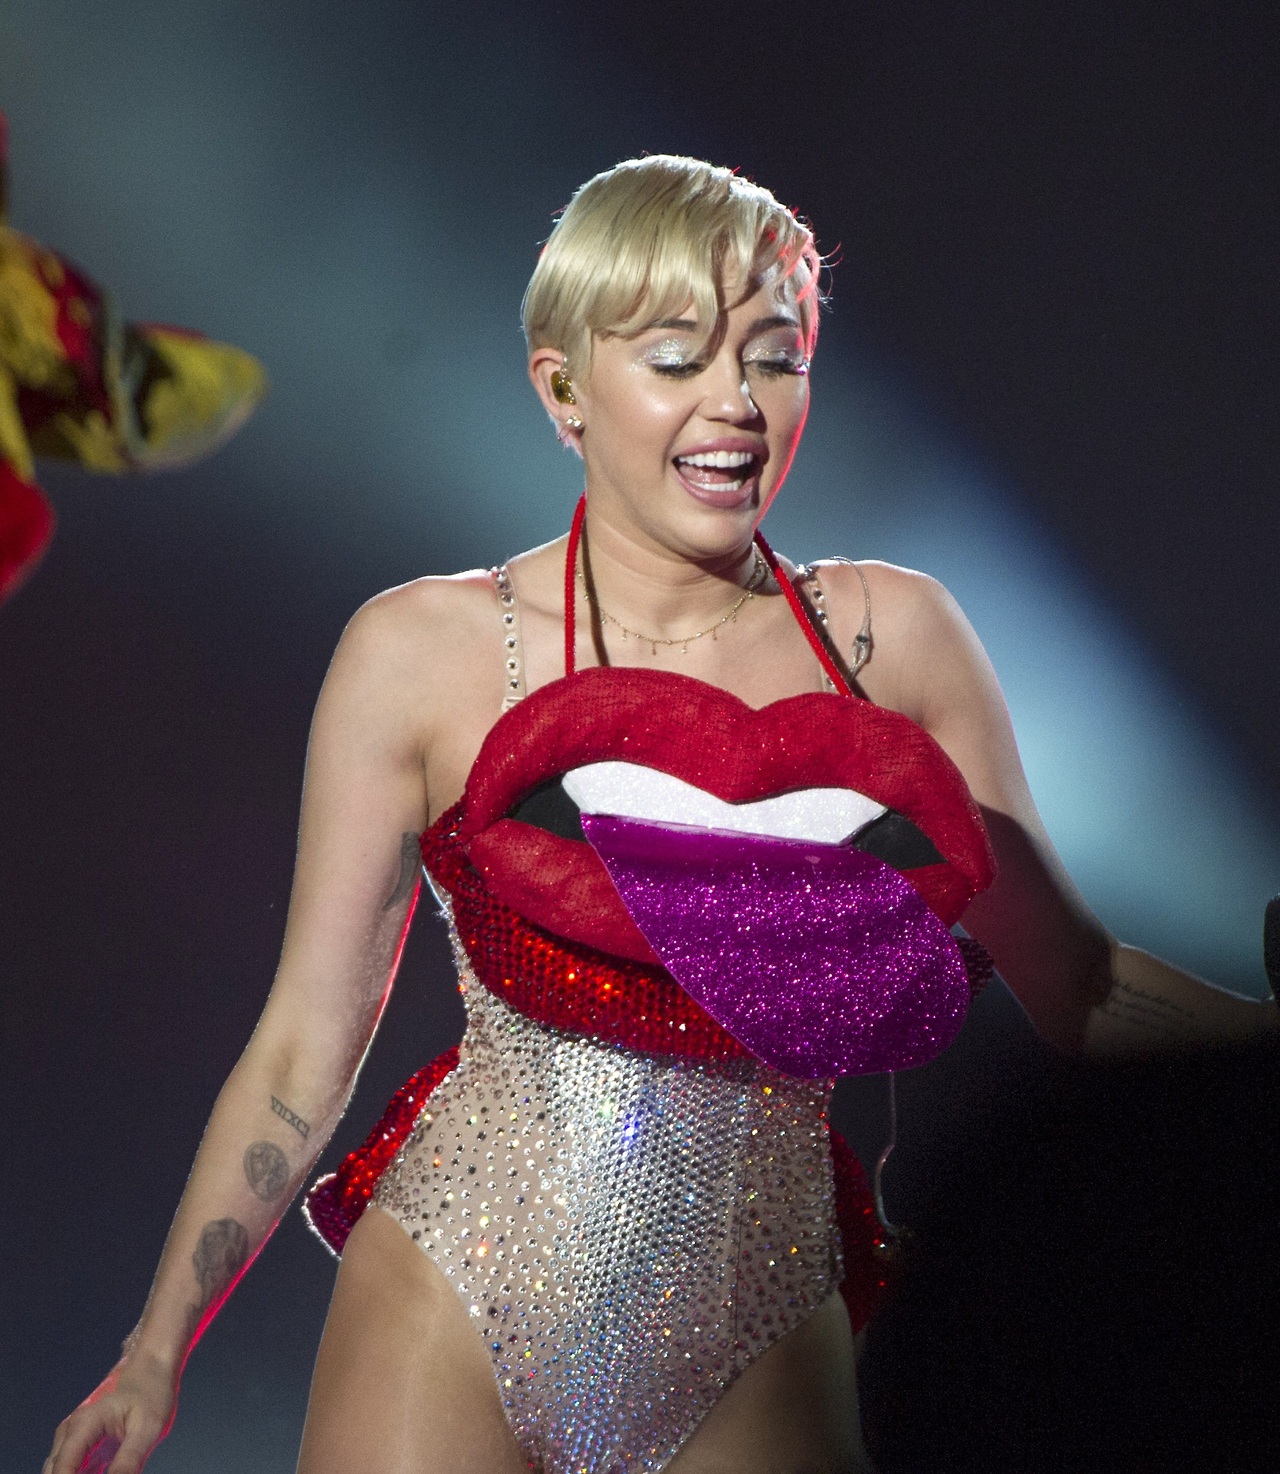 Miley Cyrus in The Bangerz Tour